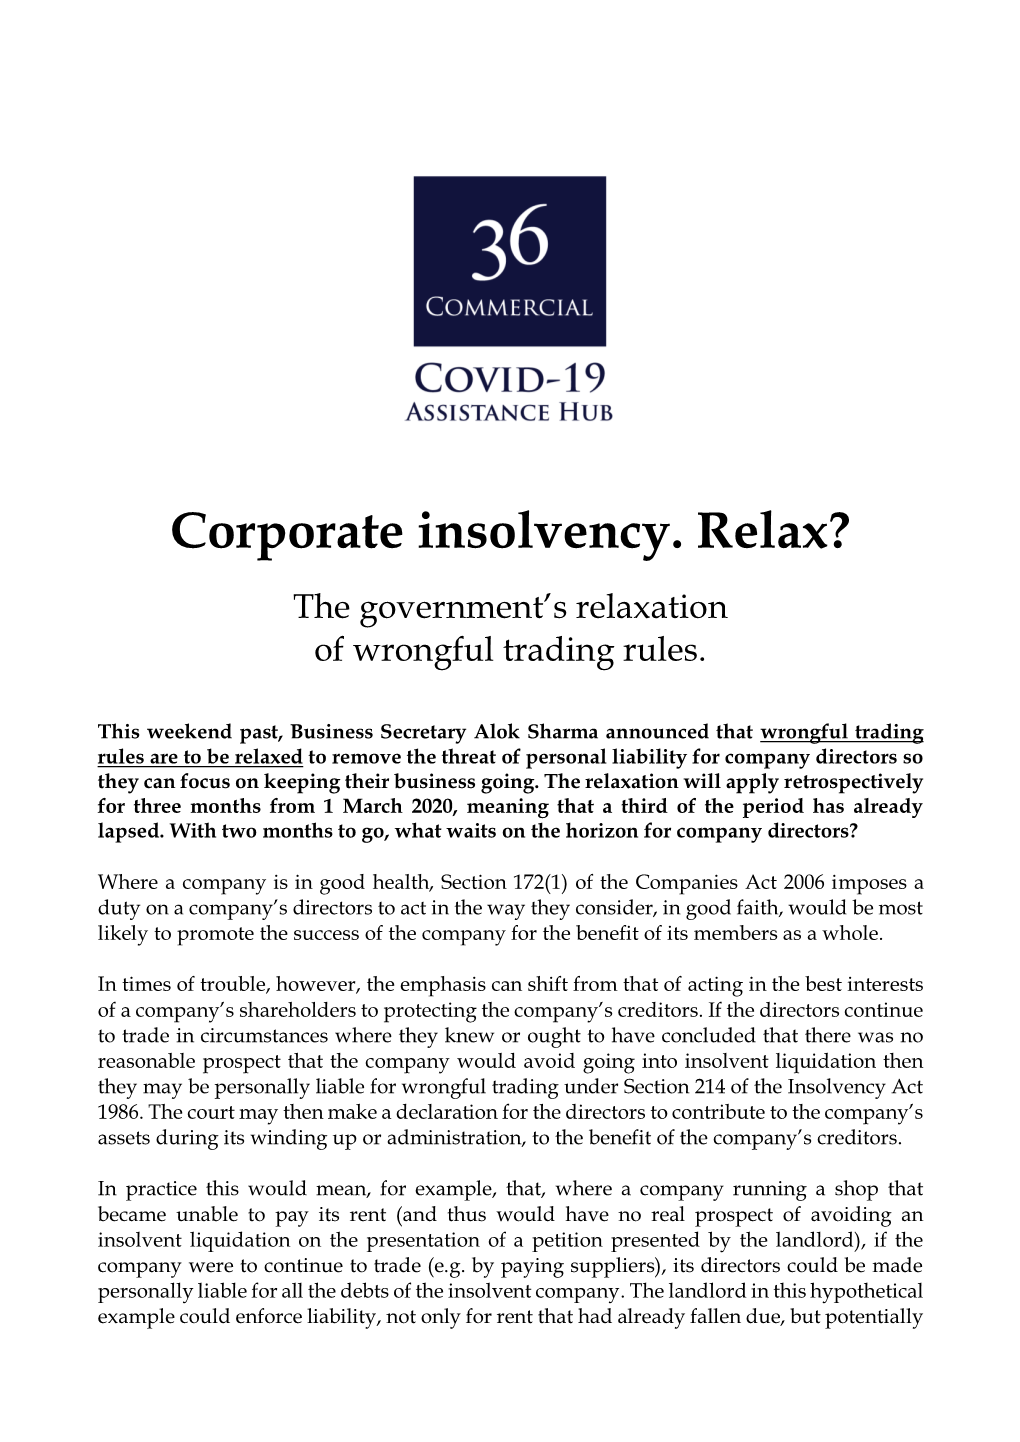 Corporate Insolvency. Relax?